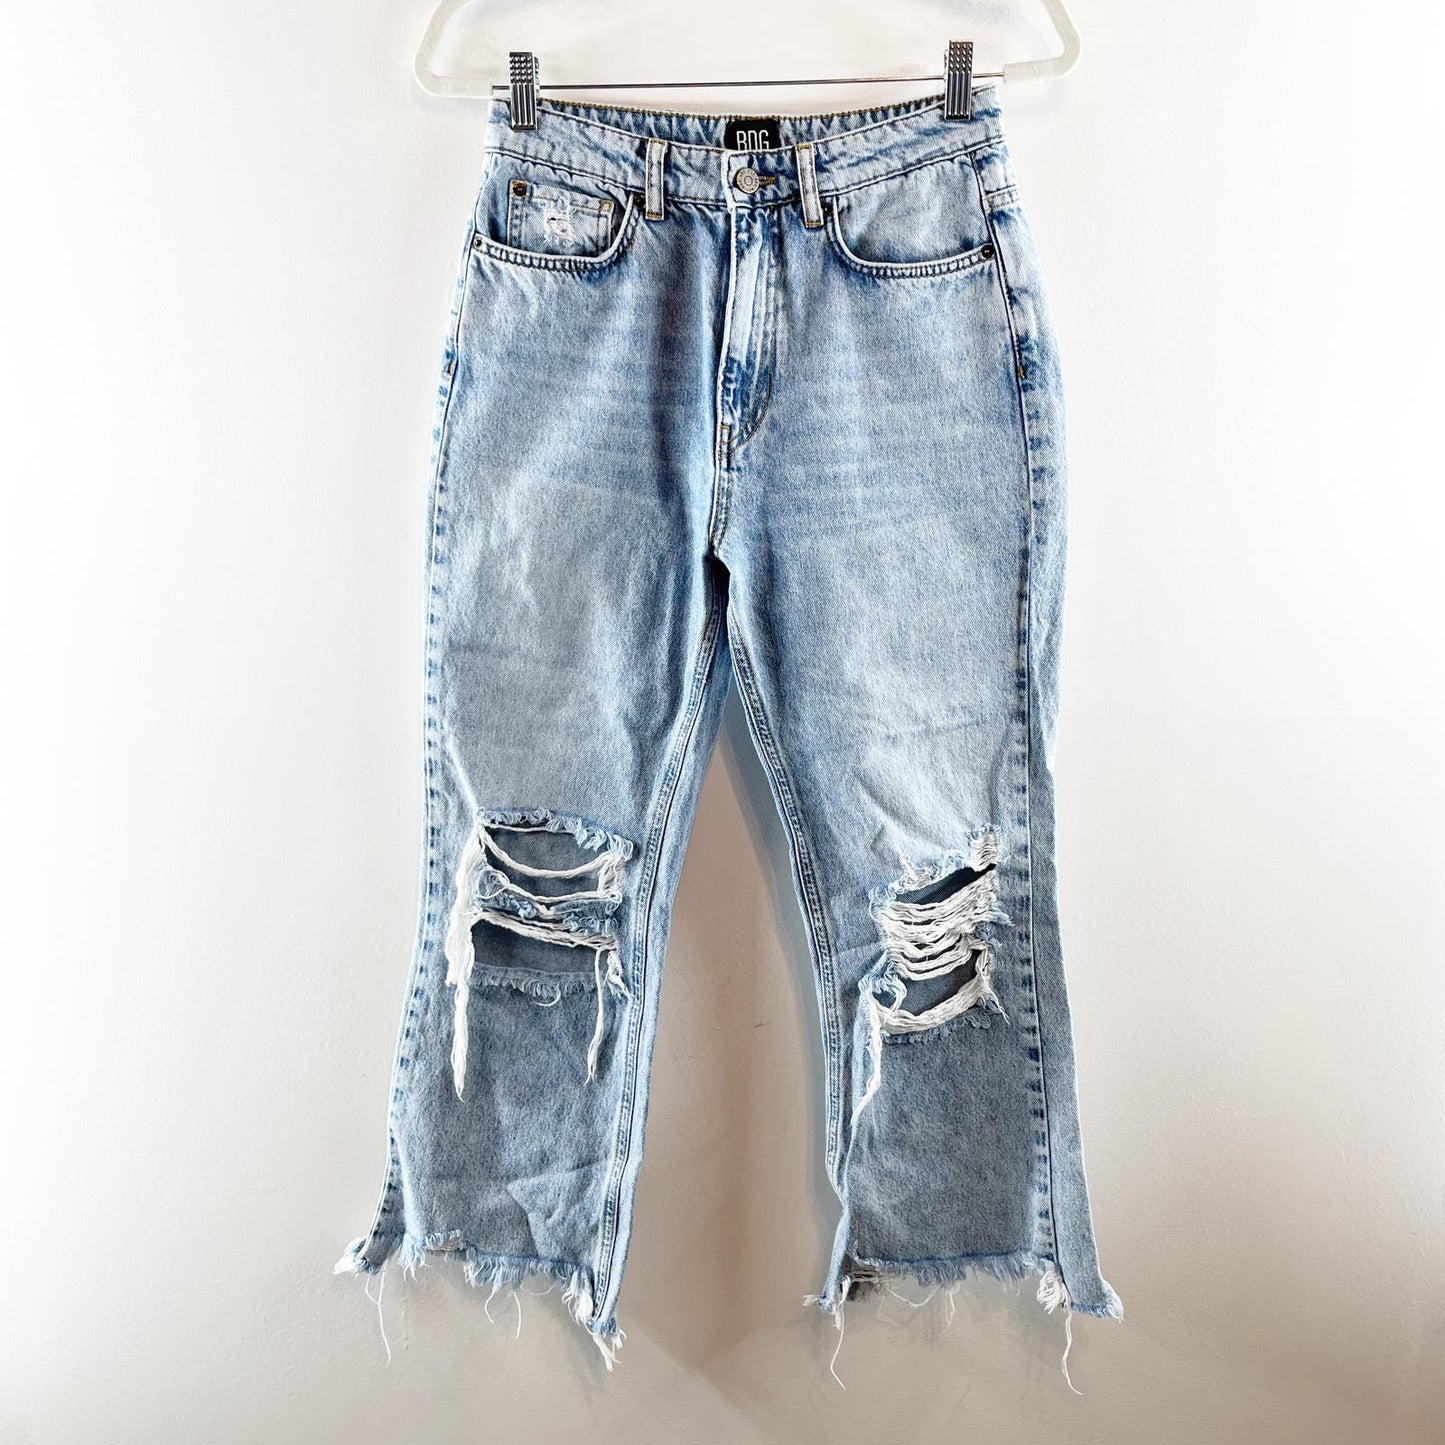 BDG Urban Outfitters Wilco Kick Crop Flare Distressed Light Wash Jeans Blue 4